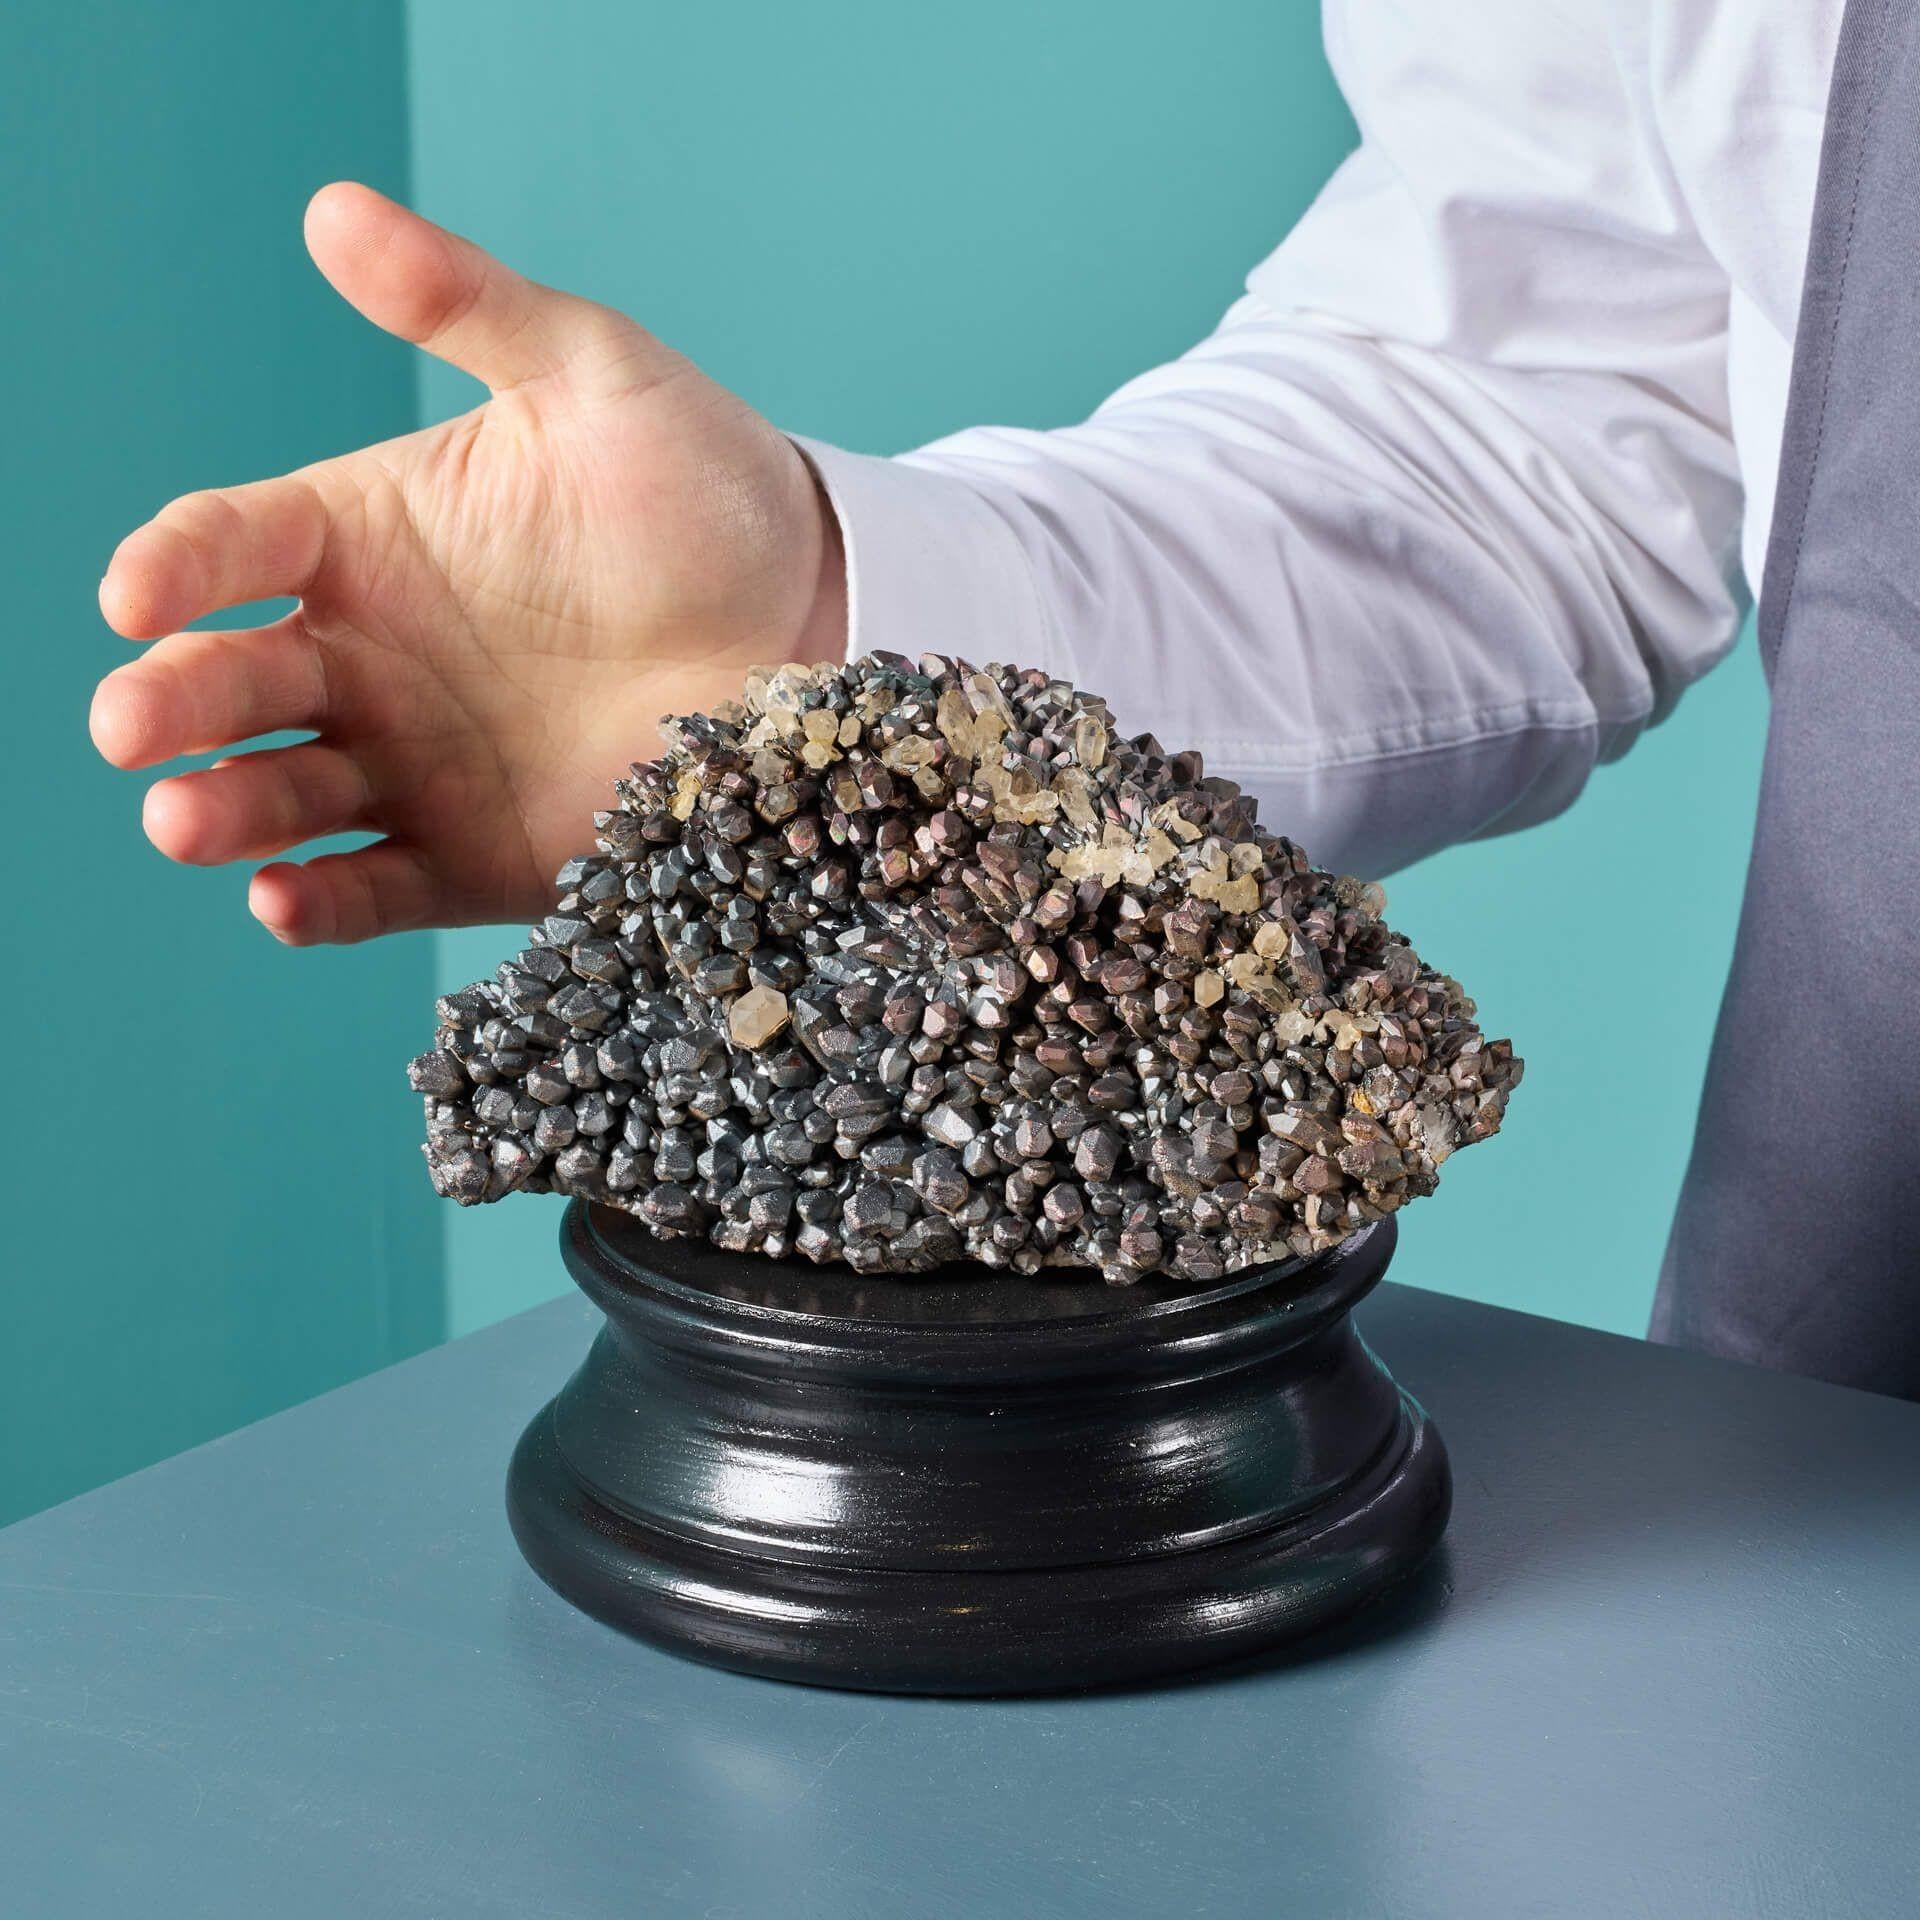 An unusual blacknite quartz cluster specimen with covelline and bornite from Ambositra, Madagascar, presented on one of our museum-quality painted plaster bases. This striking and unusual specimen comes with an exclusive painted plaster plinth as